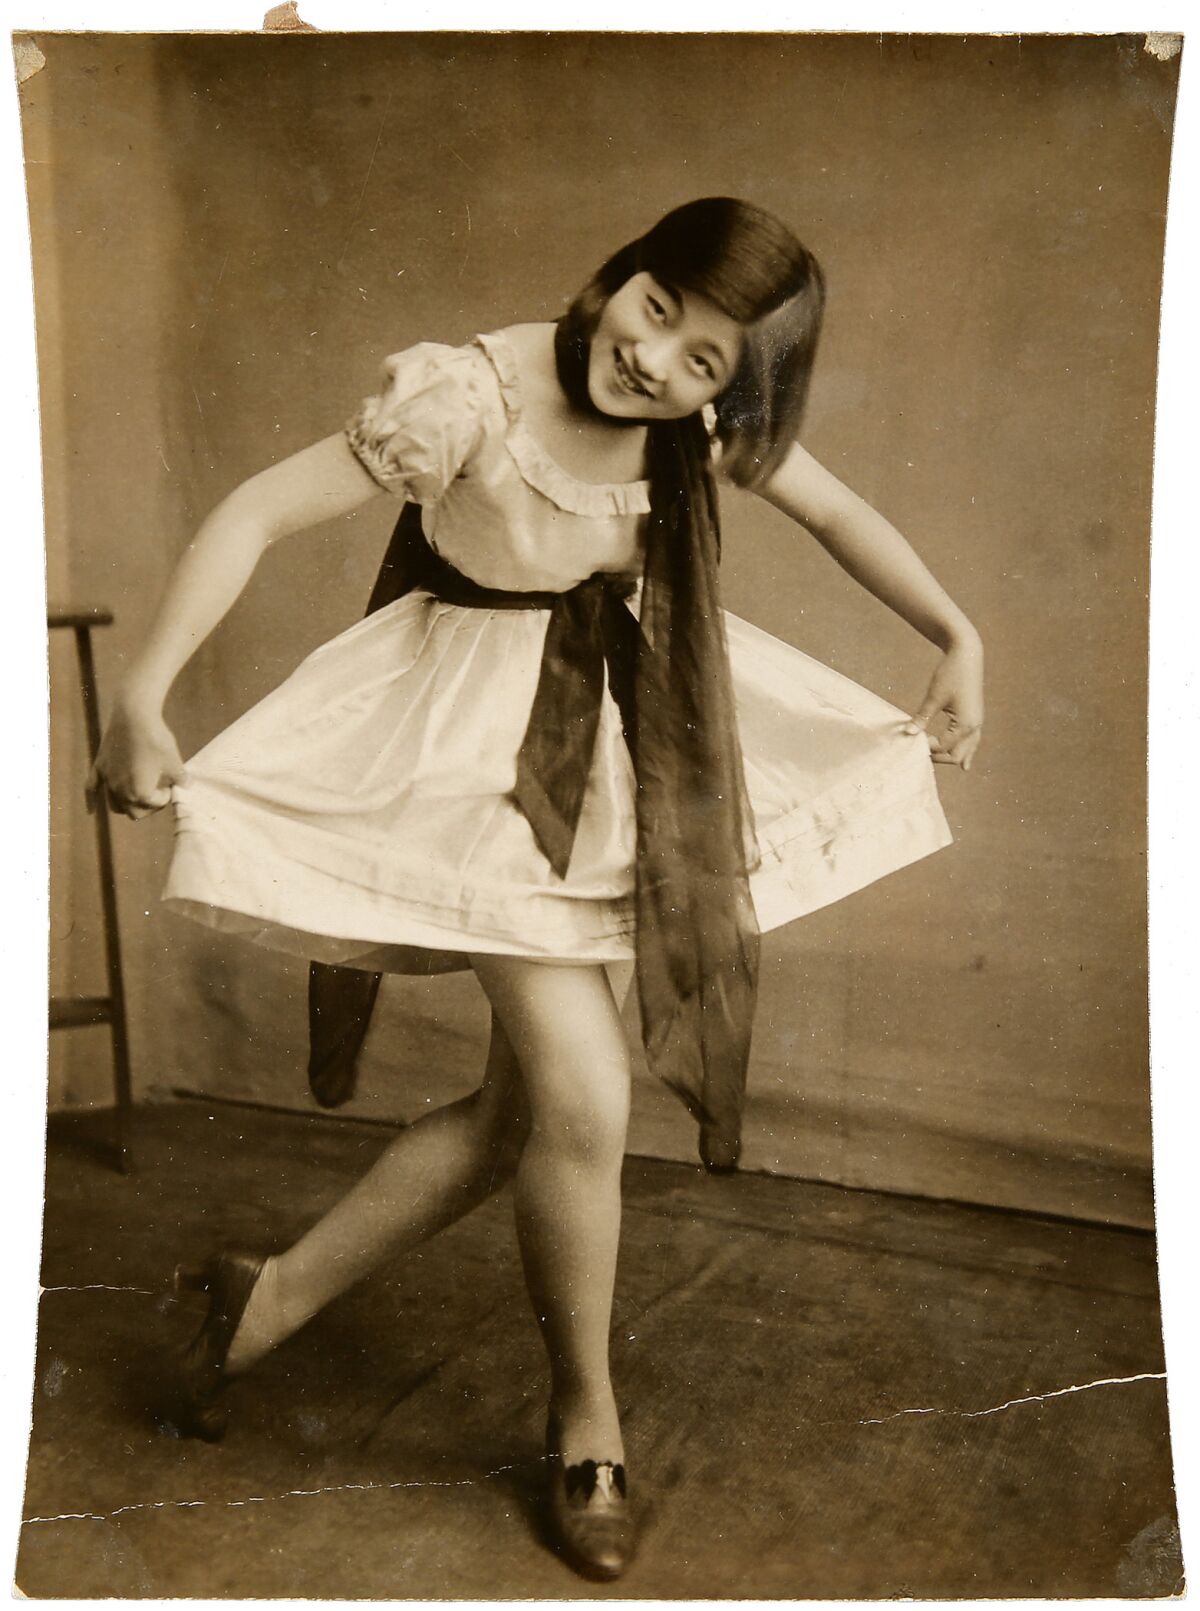 A sepia photograph of dancer Choi Seunghui shows her curtsying as she smiles at the camera.